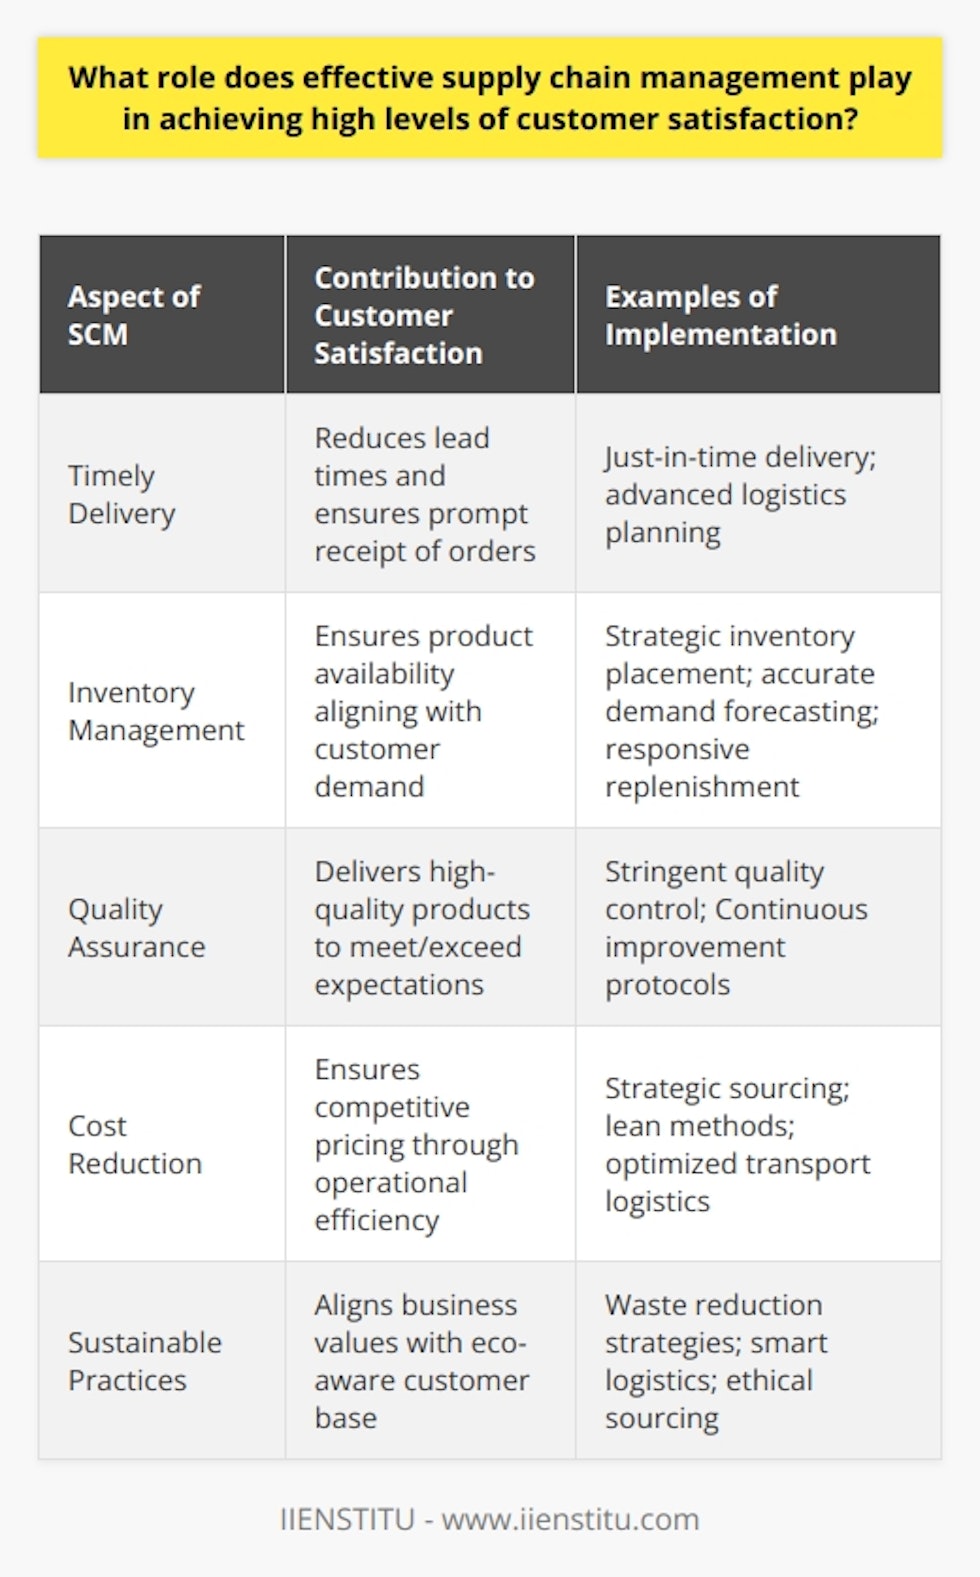 The pivotal role of effective supply chain management (SCM) transcends operational efficiency and plays a crucial part in nurturing customer satisfaction. This aspect of corporate strategy has become a cornerstone for businesses that prioritize the customer experience.**Timely Delivery**Effective SCM is crucial in ensuring that products reach consumers without delay. With just-in-time delivery methods and sophisticated logistics planning, businesses can dramatically reduce lead times, ensuring that customers receive their orders promptly. This reliability can help a business to build a strong reputation for dependability, fostering customer loyalty and repeat business.**Inventory Management**A balanced approach to inventory management through SCM can lead to a formidable alignment of demand and supply. The strategic placement of inventory, accurate demand forecasting, and responsive replenishment systems ensure that products are readily available without the repercussions of overstocking. Through inventory optimization, SCM helps to keep customers satisfied by providing what they need, when they need it.**Quality Assurance**Integral to the supply chain is a robust system that assures quality. SCM's influence on quality control begins from sourcing raw materials to the final delivery of the product. By adopting stringent quality standards and continuous improvement protocols, SCM contributes to delivering products that meet or exceed customer expectations. This attention to detail minimizes the occurrence of defects and ensures consistency, which is fundamental to customer trust and satisfaction.**Cost Reduction**Efficient SCM has cost benefits that can extend to customers, making products and services more accessible. Through strategic sourcing, lean methods, and optimization of transport logistics, supply chain managers can cut unnecessary costs while maintaining product quality. Savings can be passed to customers, allowing for competitive pricing without sacrificing profit margins. This balance is key to attracting and retaining cost-conscious customers.**Sustainable Practices**SCM is increasingly associated with sustainability, reflecting a commitment to ethical practices and environmental stewardship. By minimizing environmental impact through waste reduction, smarter logistics, and ethical sourcing, businesses can appeal to a growing demographic of eco-aware customers. Such sustainable SCM practices can enhance company image and customer satisfaction by aligning with the values of socially responsible consumers.In conclusion, SCM's role in ensuring customer satisfaction is a multi-faceted endeavor that touches upon every facet of purchasing experience. From the precision of delivery and inventory management to the assurance of quality, cost efficiency, and commitment to sustainability, effective supply chain management remains an indispensable element of customer-centric business strategies. As organizations continue to innovate within their supply chains, the direct correlation to customer satisfaction is set to strengthen, reinforcing SCM as a vital competitive advantage in the global marketplace.